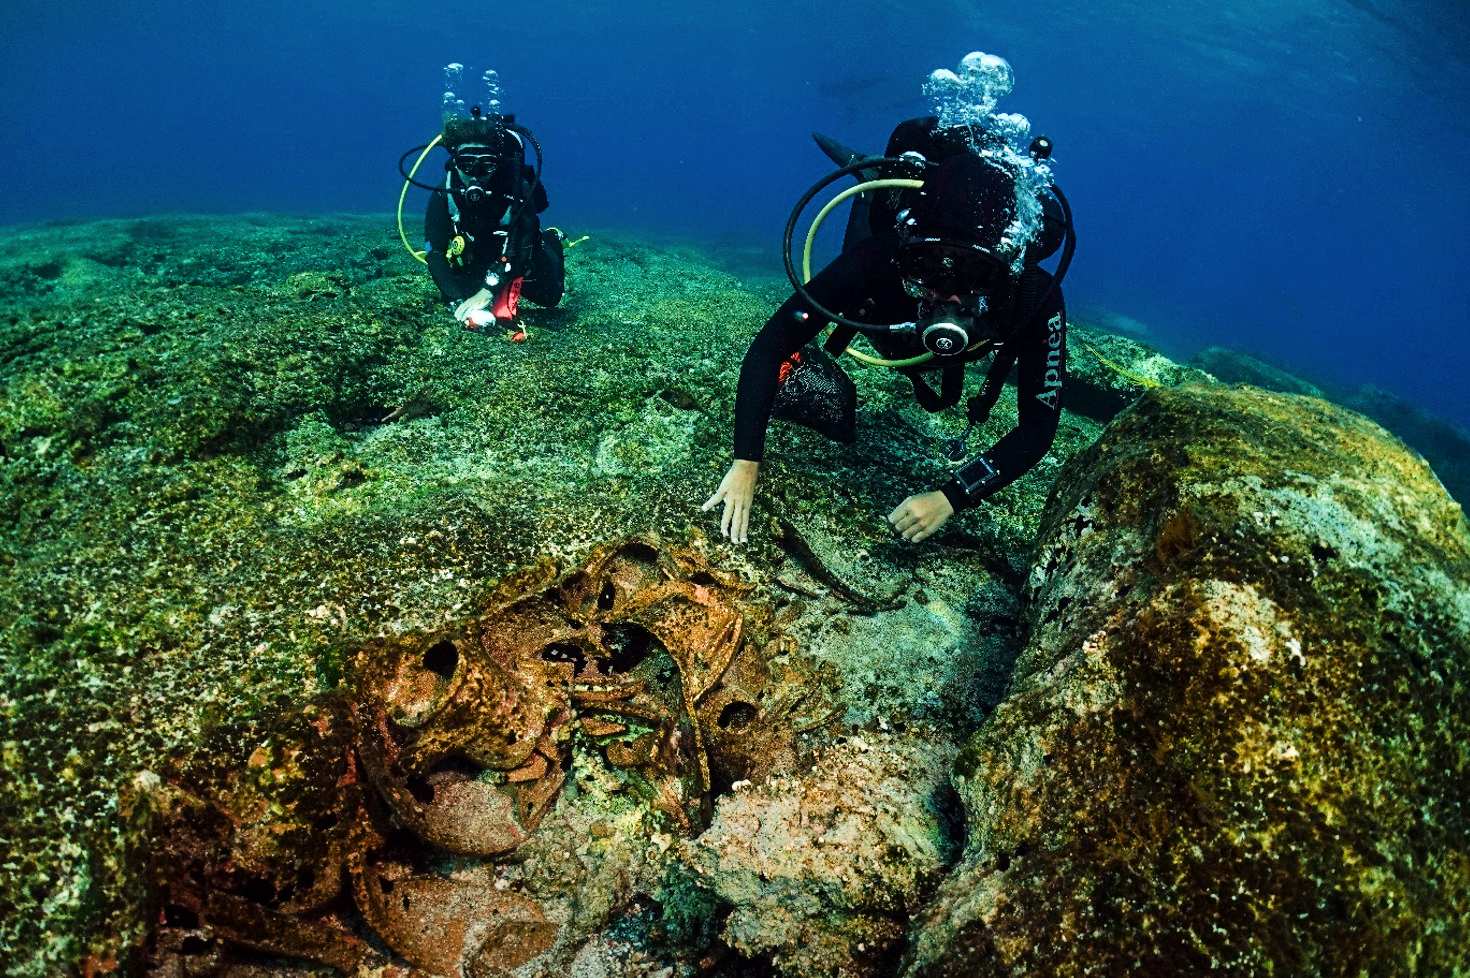 Last dives on 10 shipwrecks spanning 5,000 years